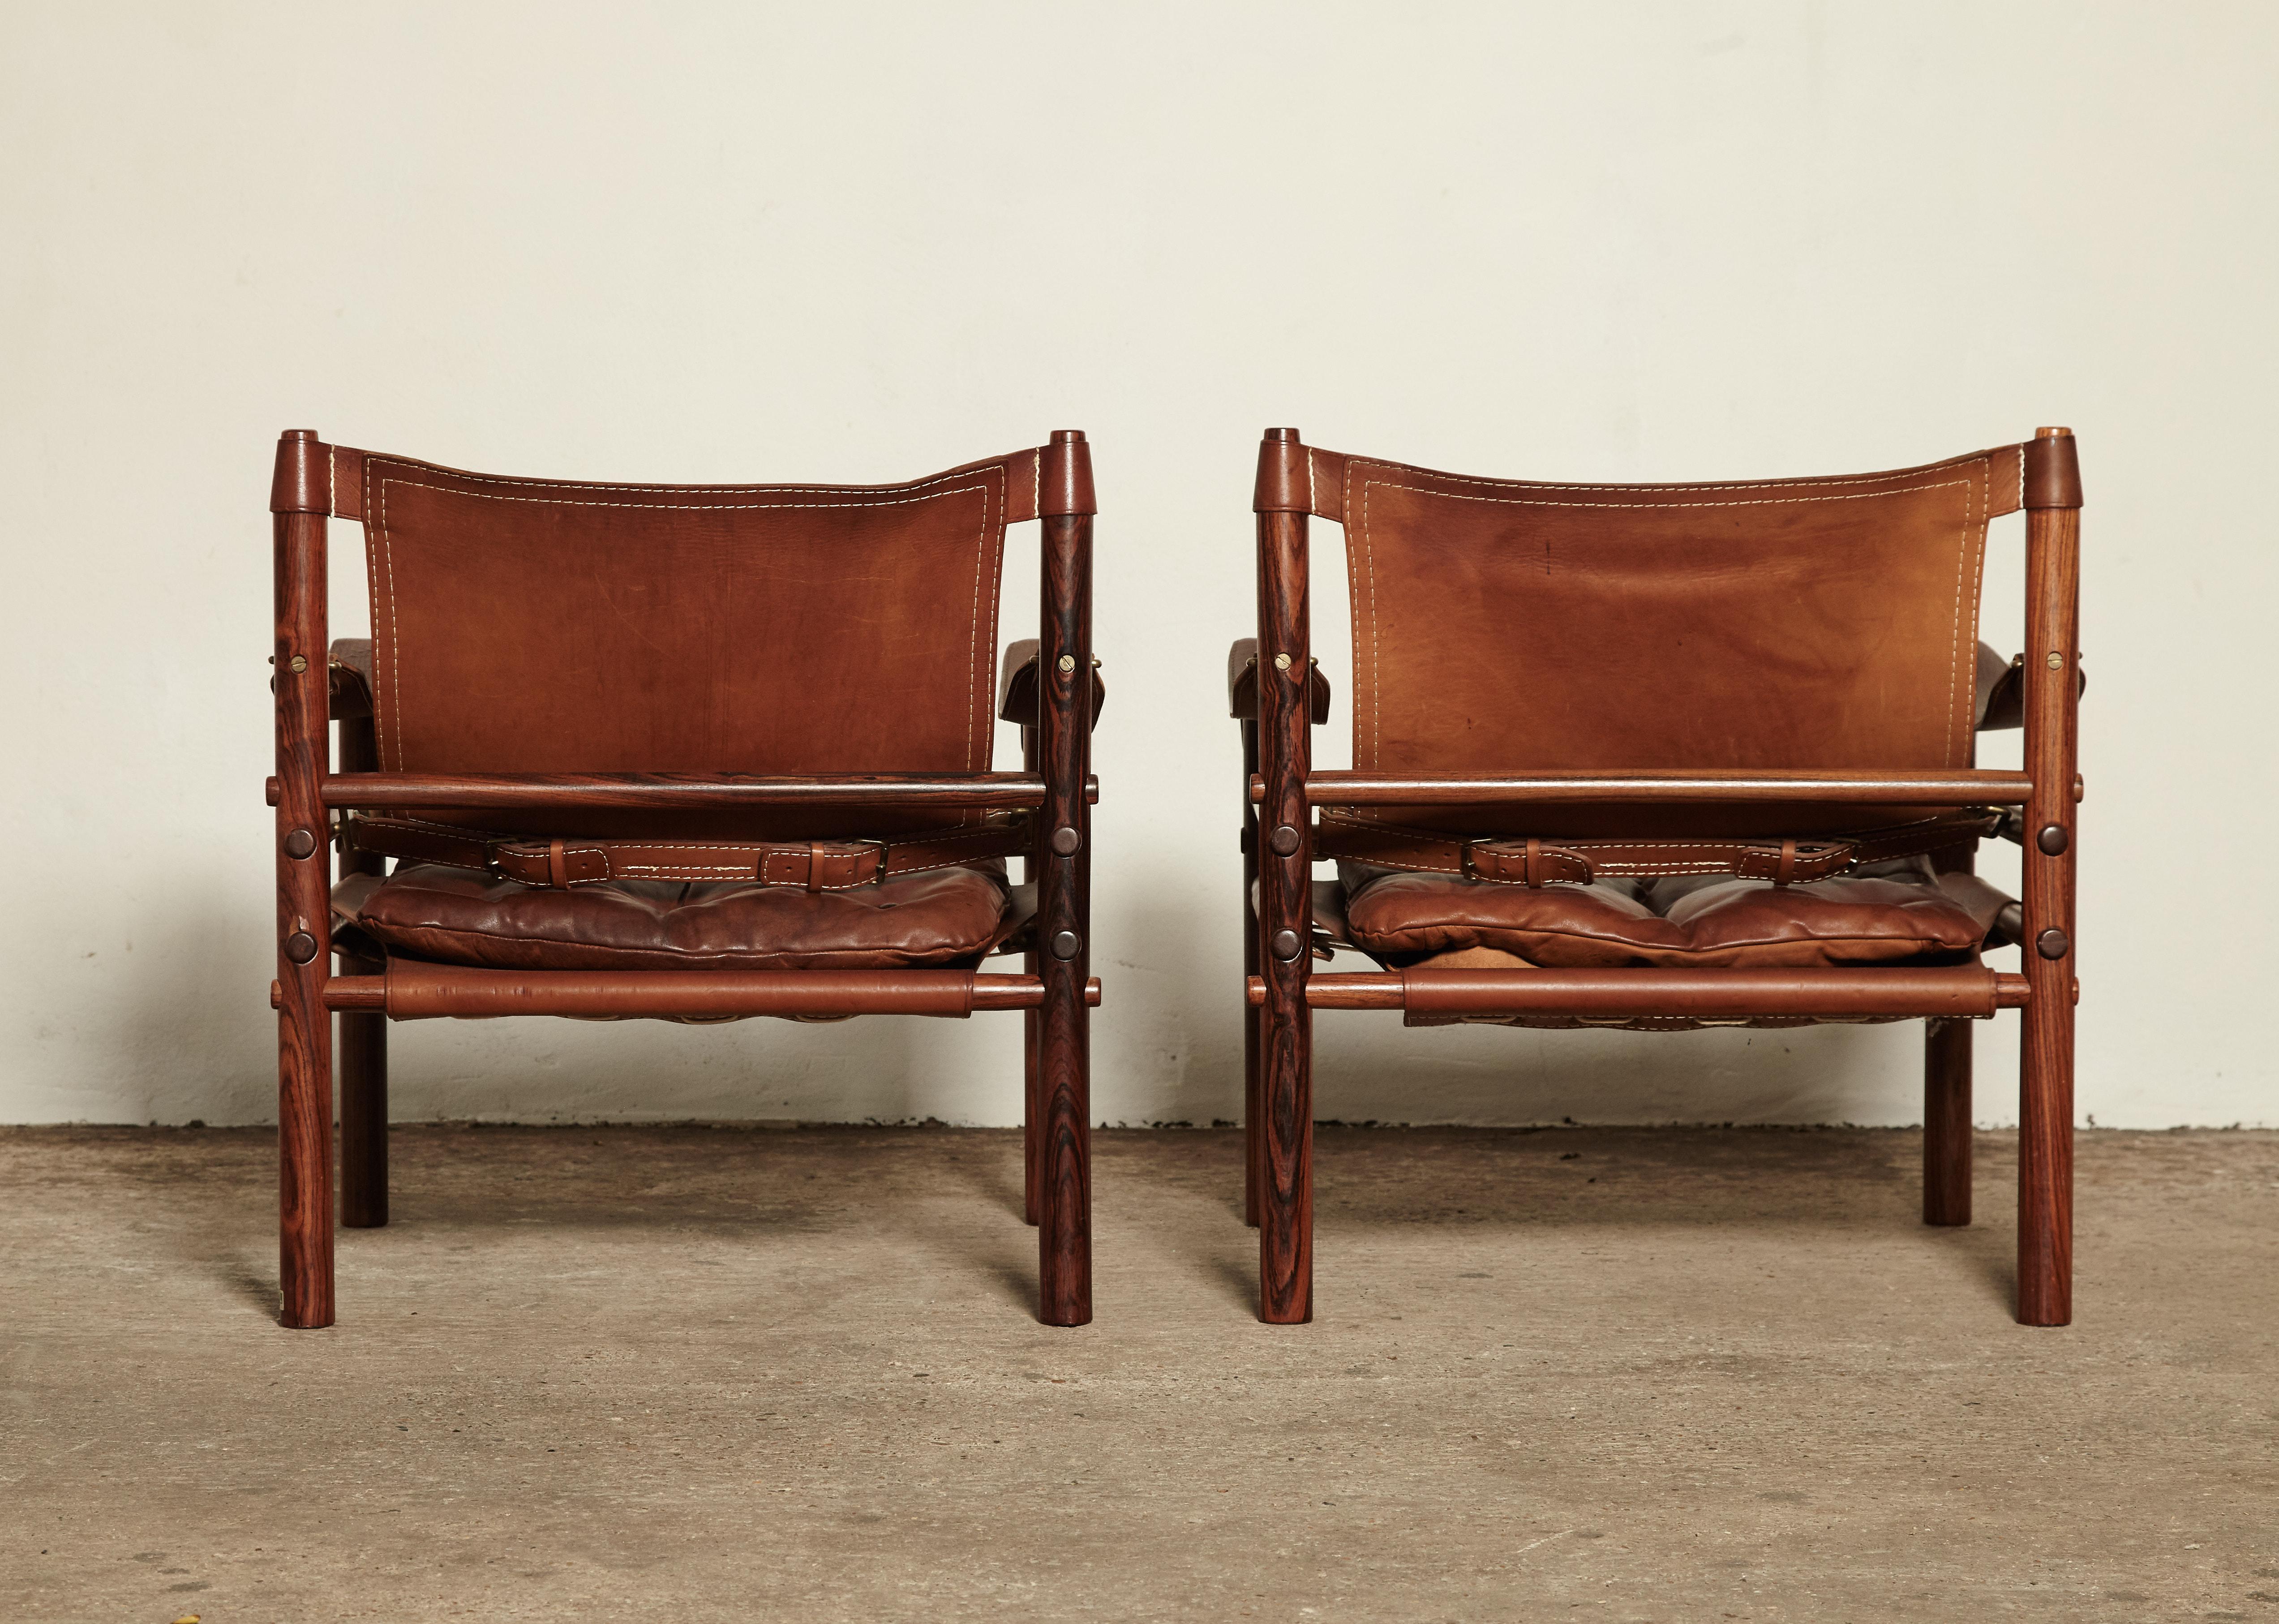 Brass Stunning Pair of Arne Norell Safari Sirocco Chairs, Sweden, 1960s